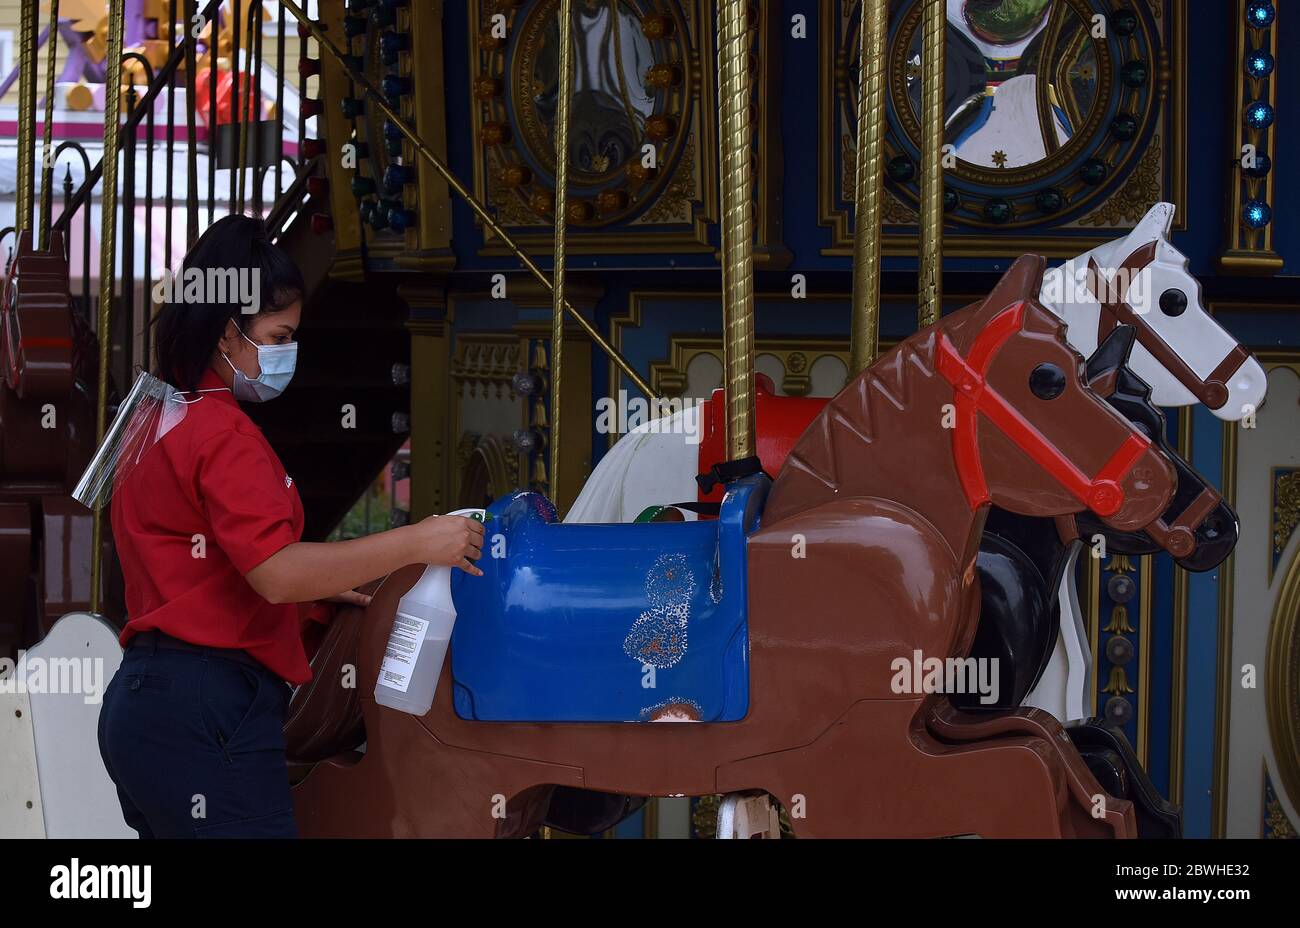 June 1, 2020 - Winter Haven, Florida, United States - An Employee disinfects the horses on the Grand Carousel ride at LEGOLAND Florida on the day the theme park reopened to the public after closing in mid-March due to the coronavirus pandemic. Guests are now required to submit to temperature checks and the wearing of face coverings is recommended but not required. (Paul Hennessy/Alamy Live News) Stock Photo